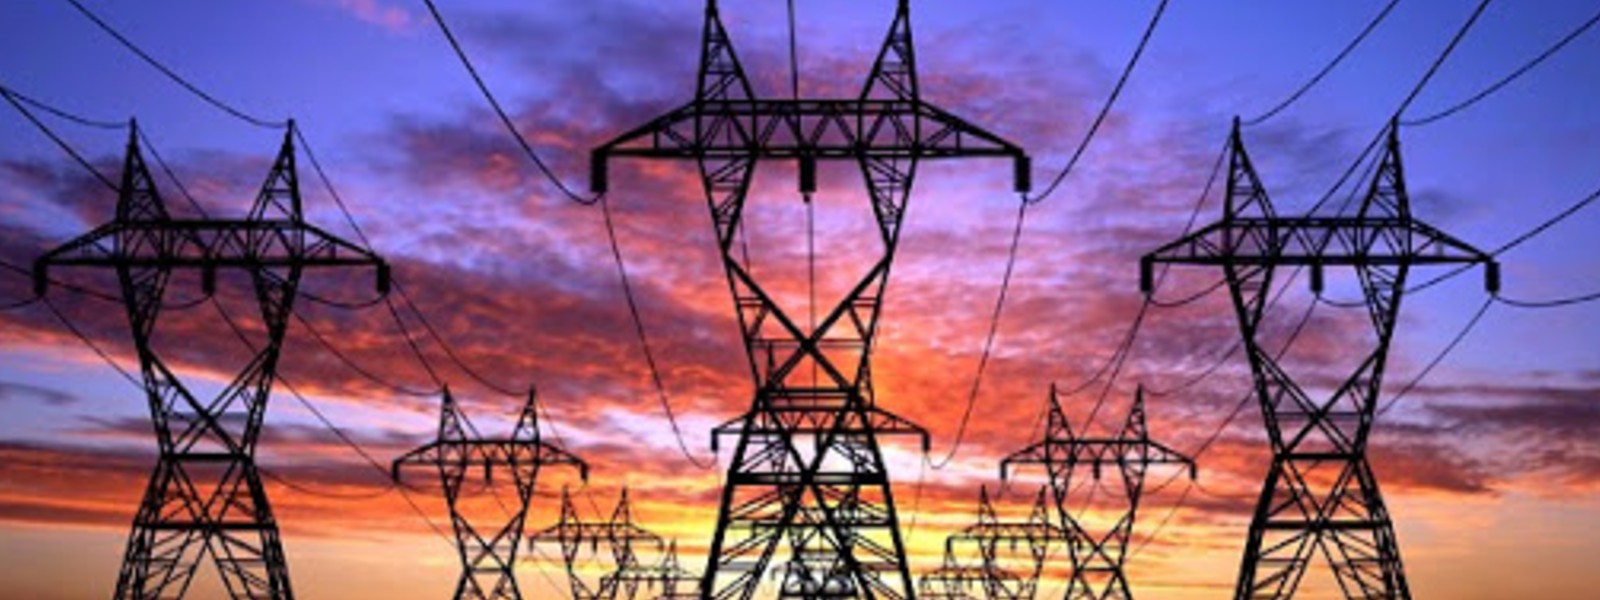 Electricity supply restored to many areas – Energy Ministry